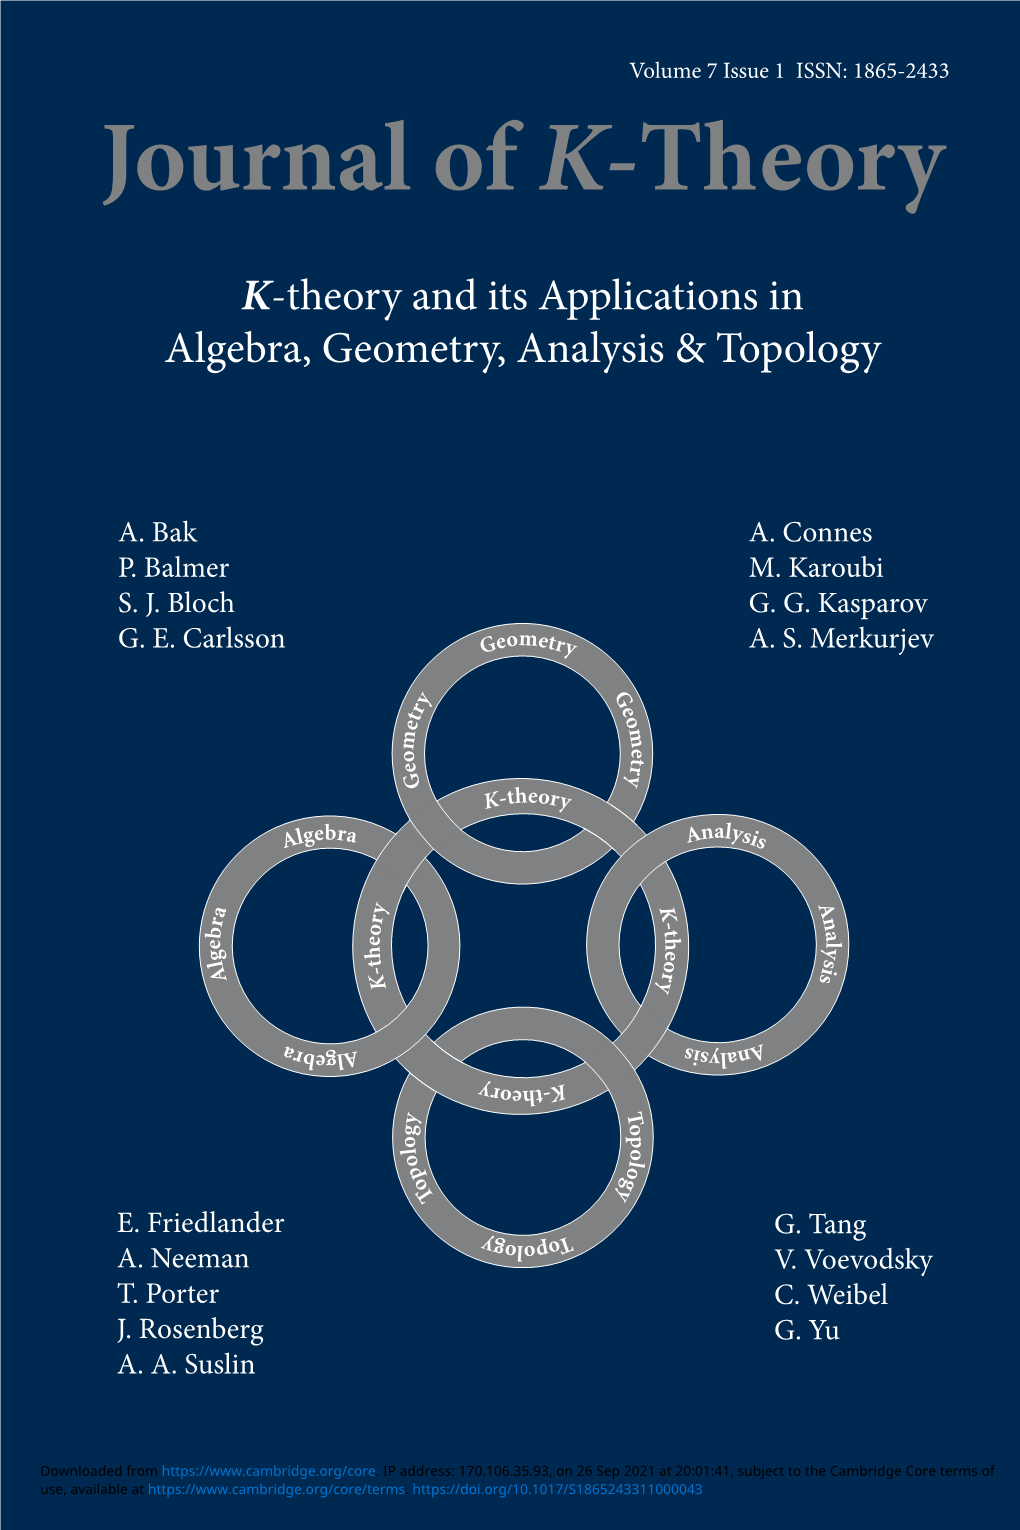 Journal of K-Theory